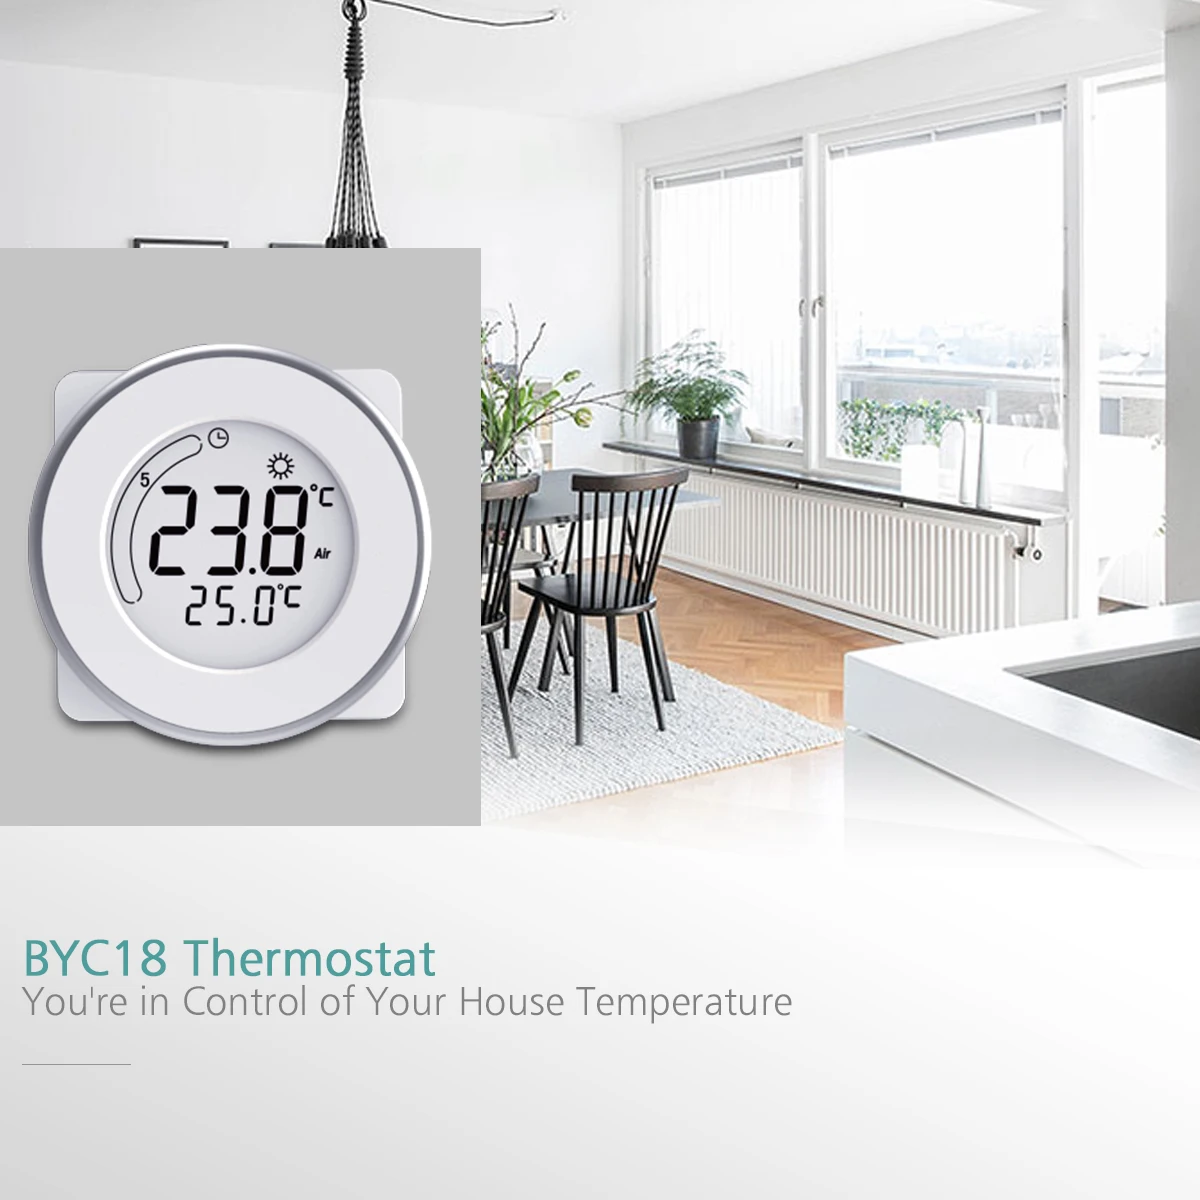 BYC18.GH3 LCD Display Thermostat Household Display Thermostat Floor Heating Weekly Room Temperature Controller Thermoregulator